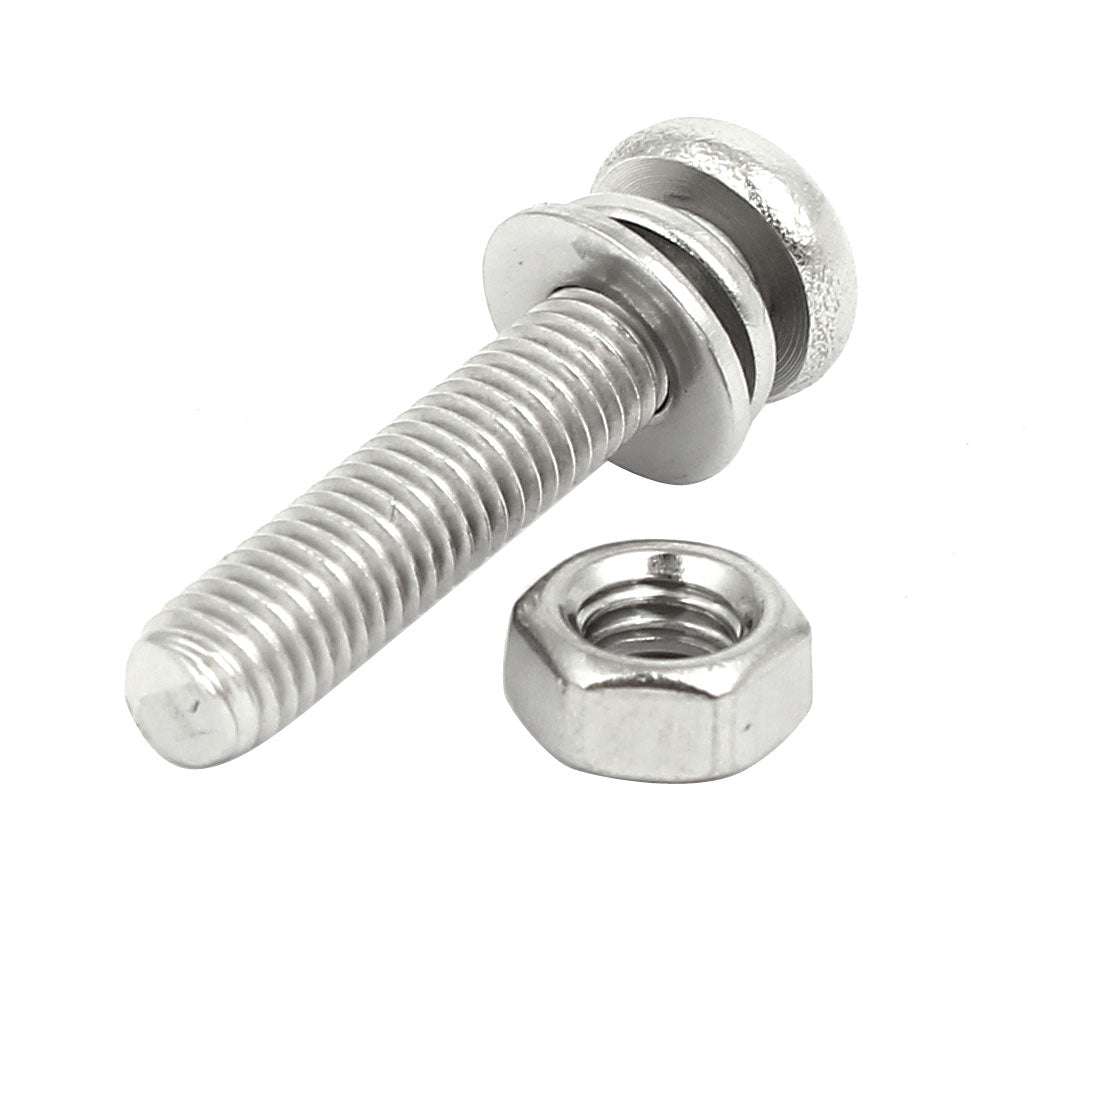 uxcell Uxcell M5x25mm 304 Stainless Steel Phillips Pan Head Bolt Screw Nut w Washer 12 Sets